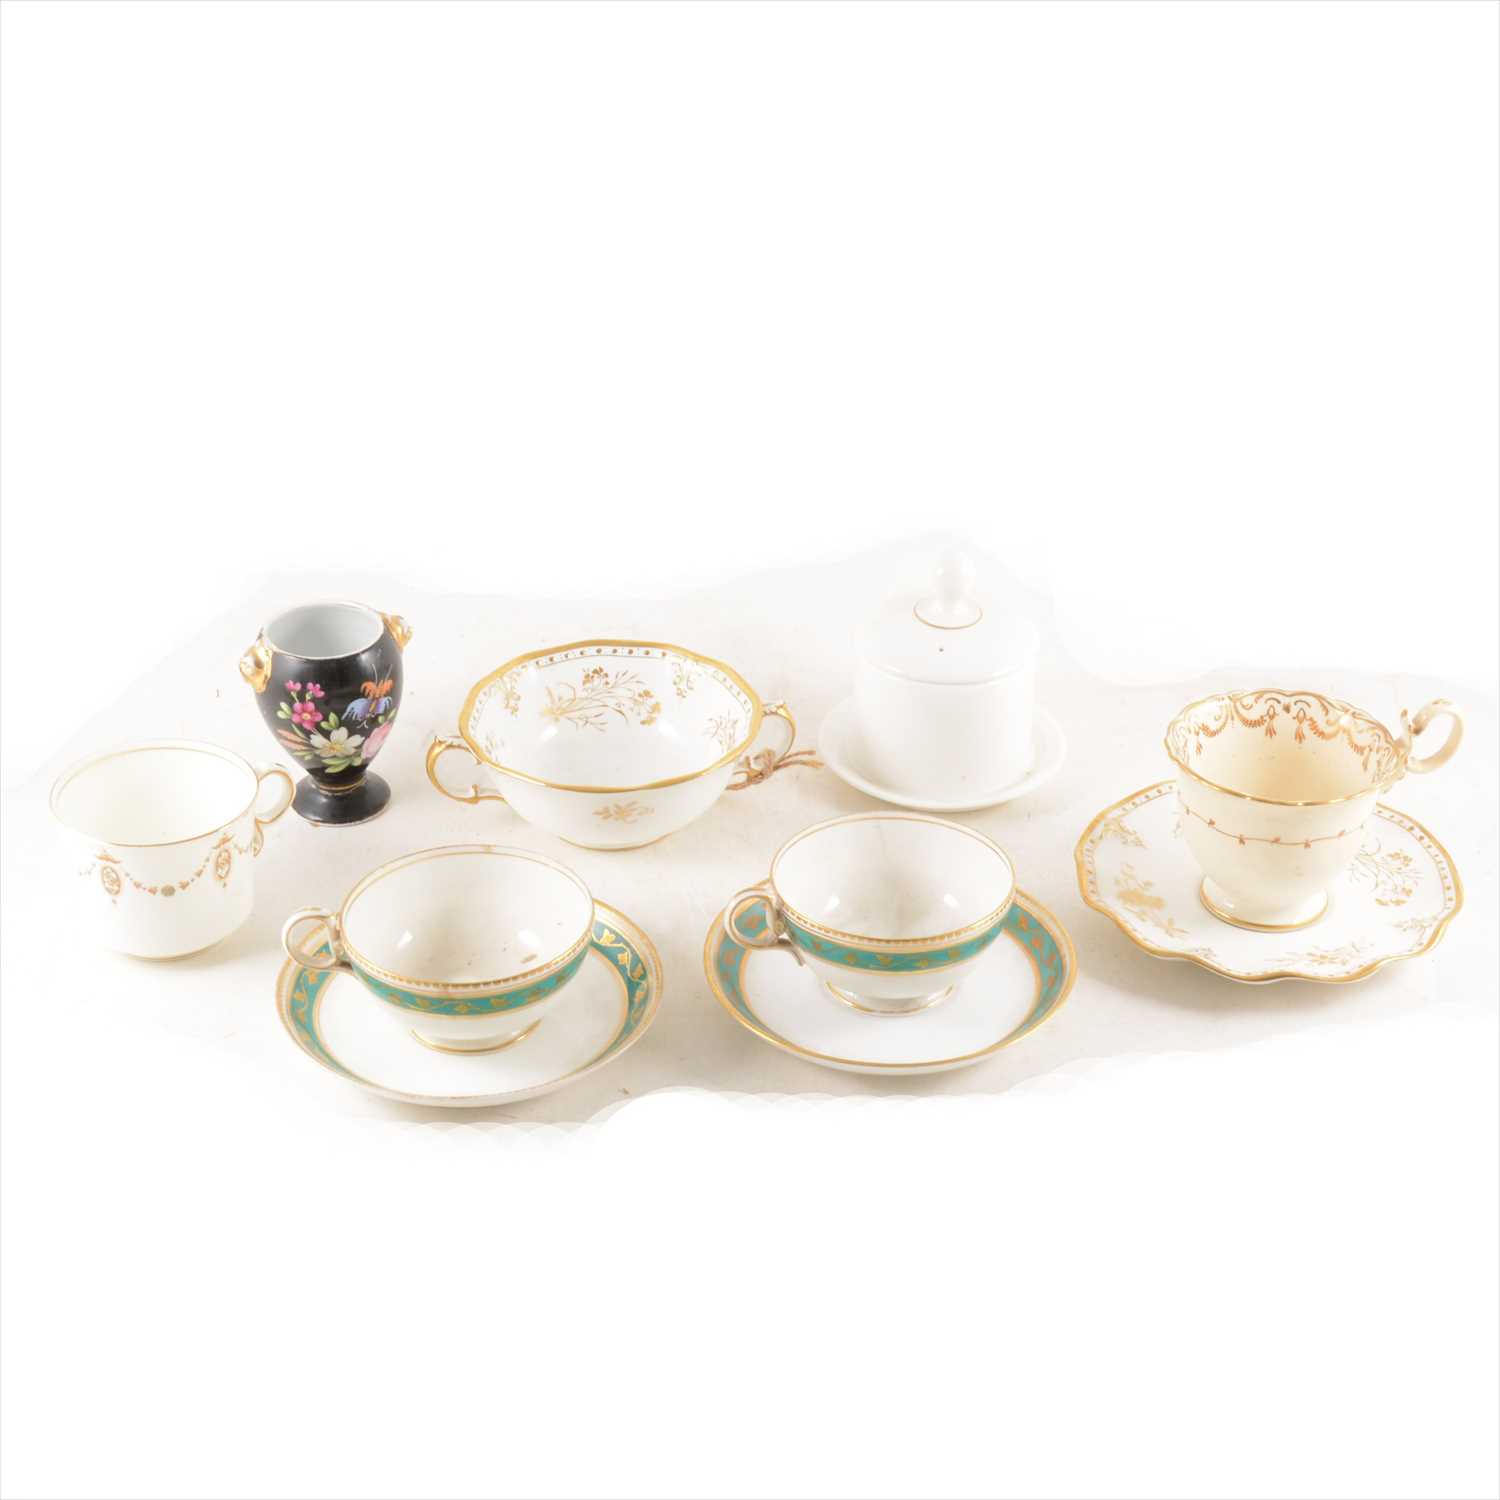 Lot 31 - Copeland part teaset and other decorative teaware